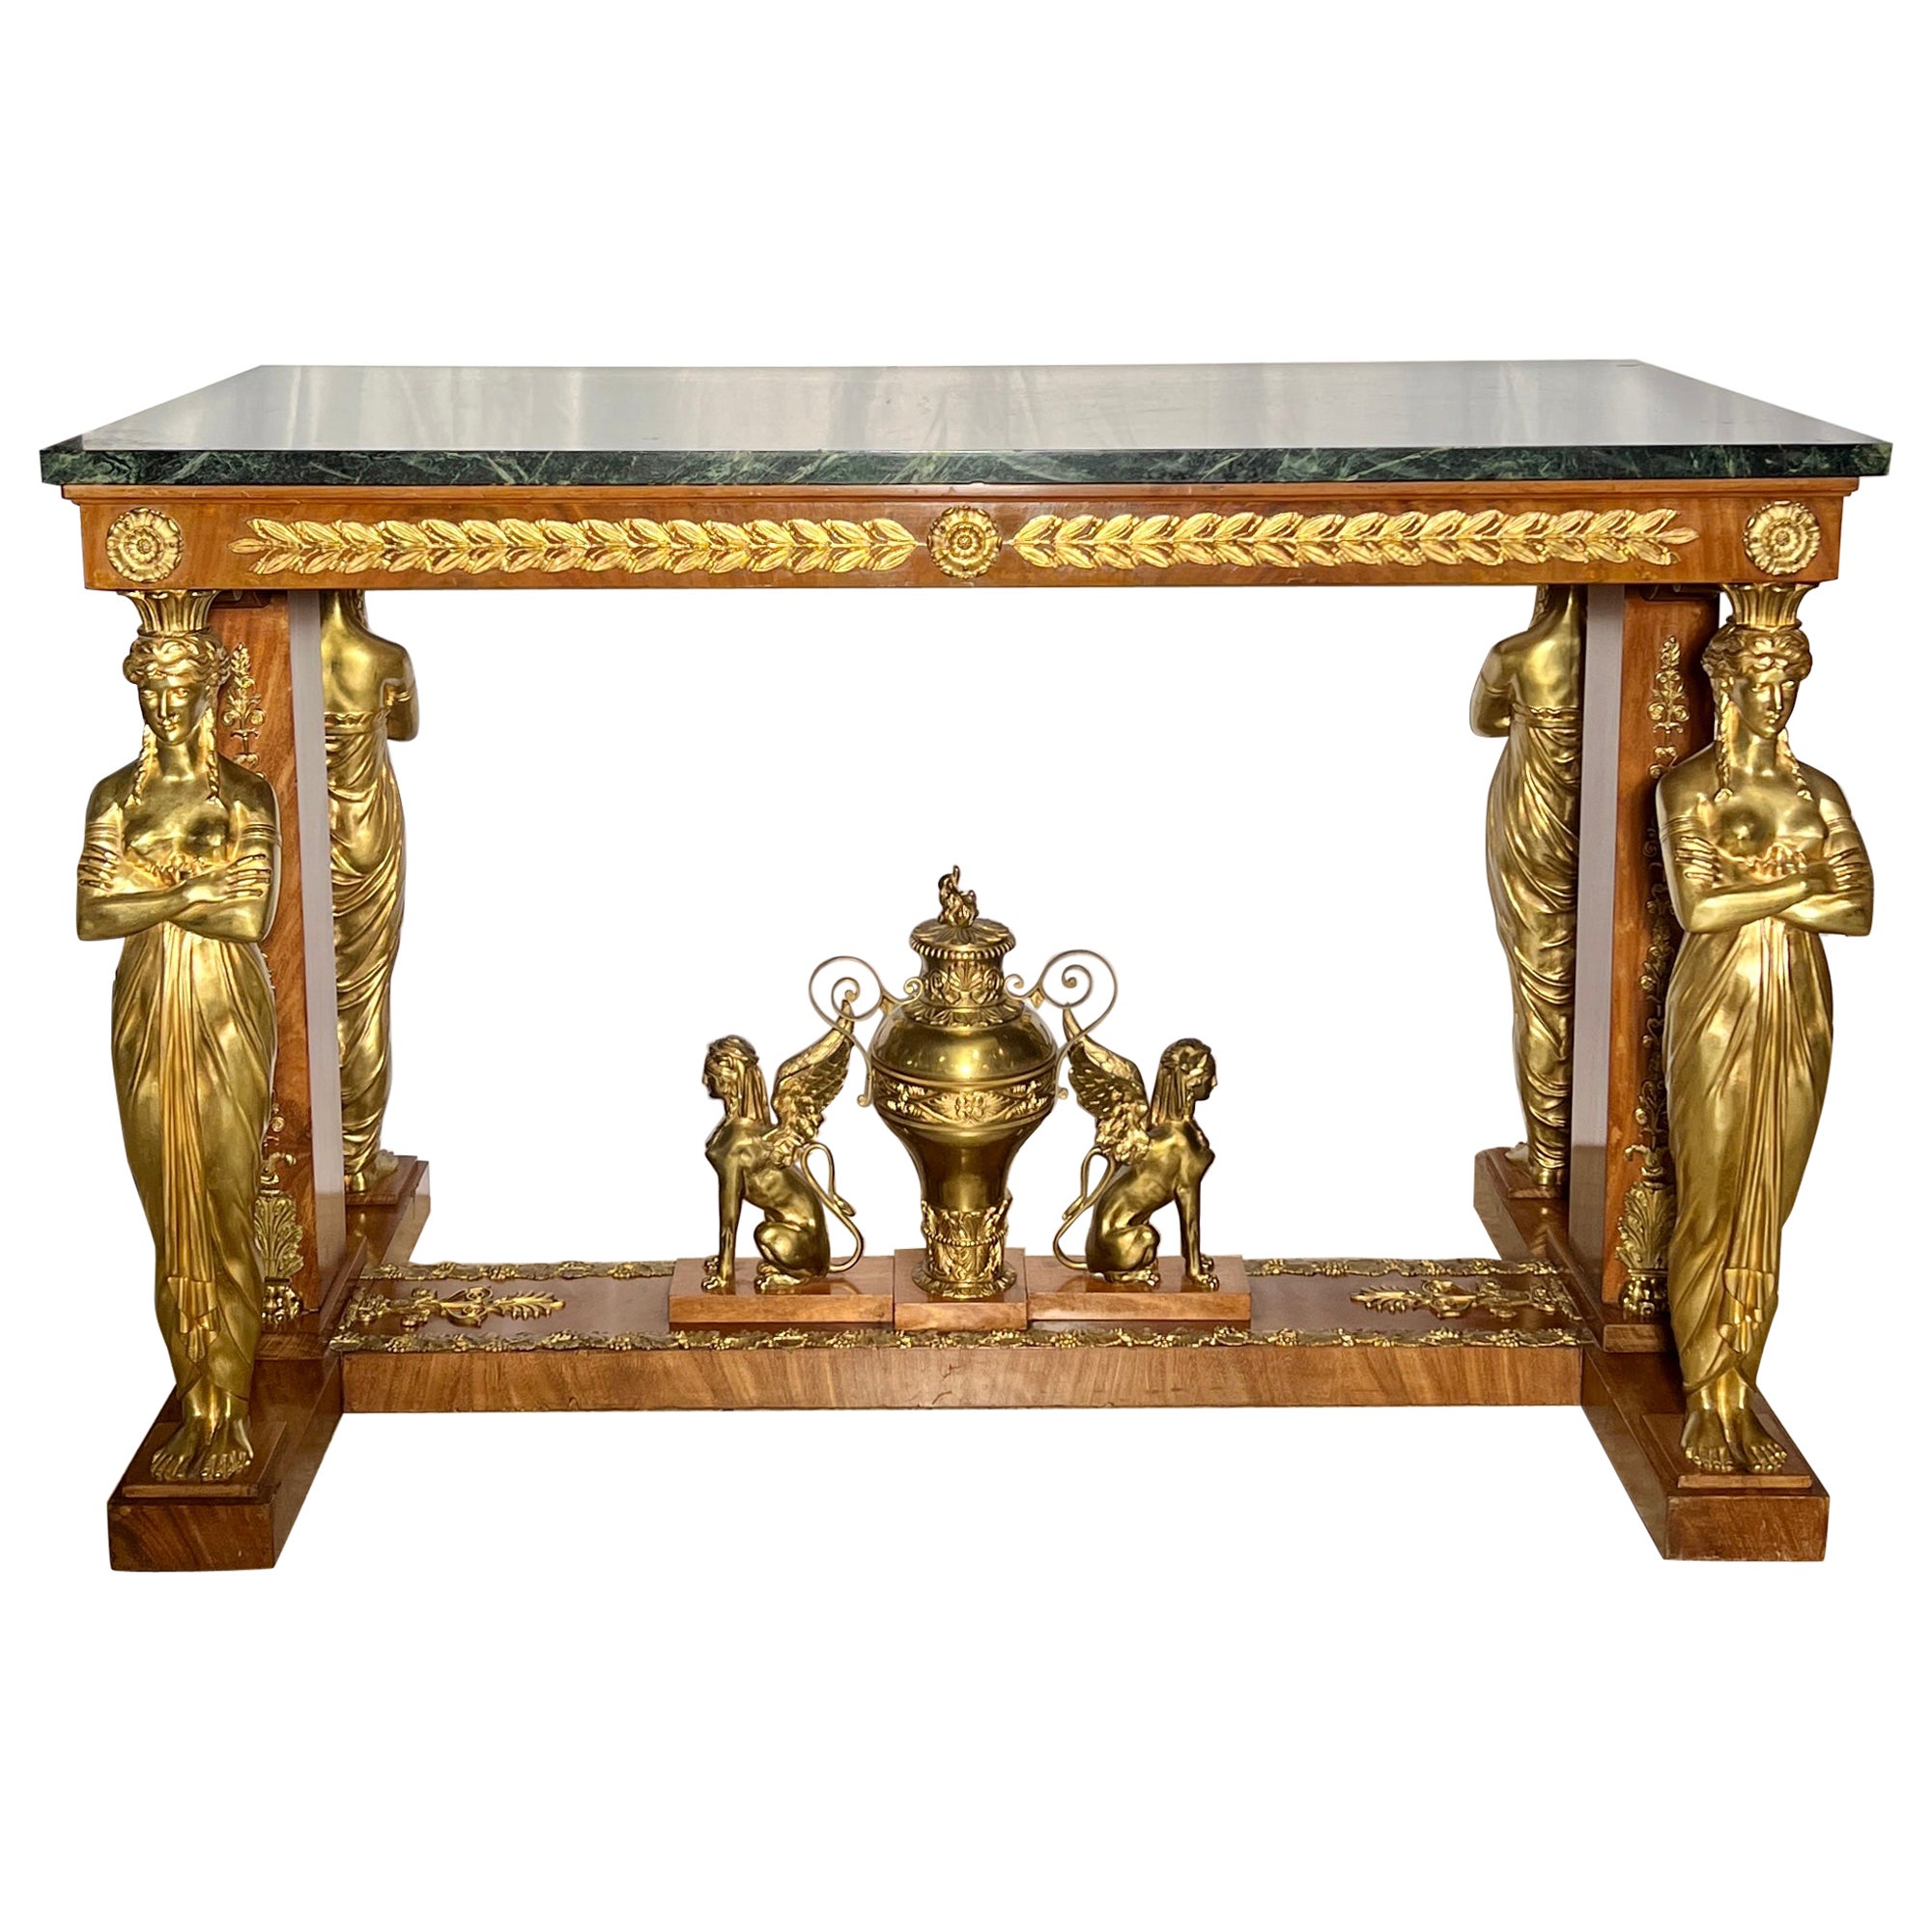 Antique French Empire Gilt Bronze & Mahogany Marble Top Center Table, Circa 1880 For Sale